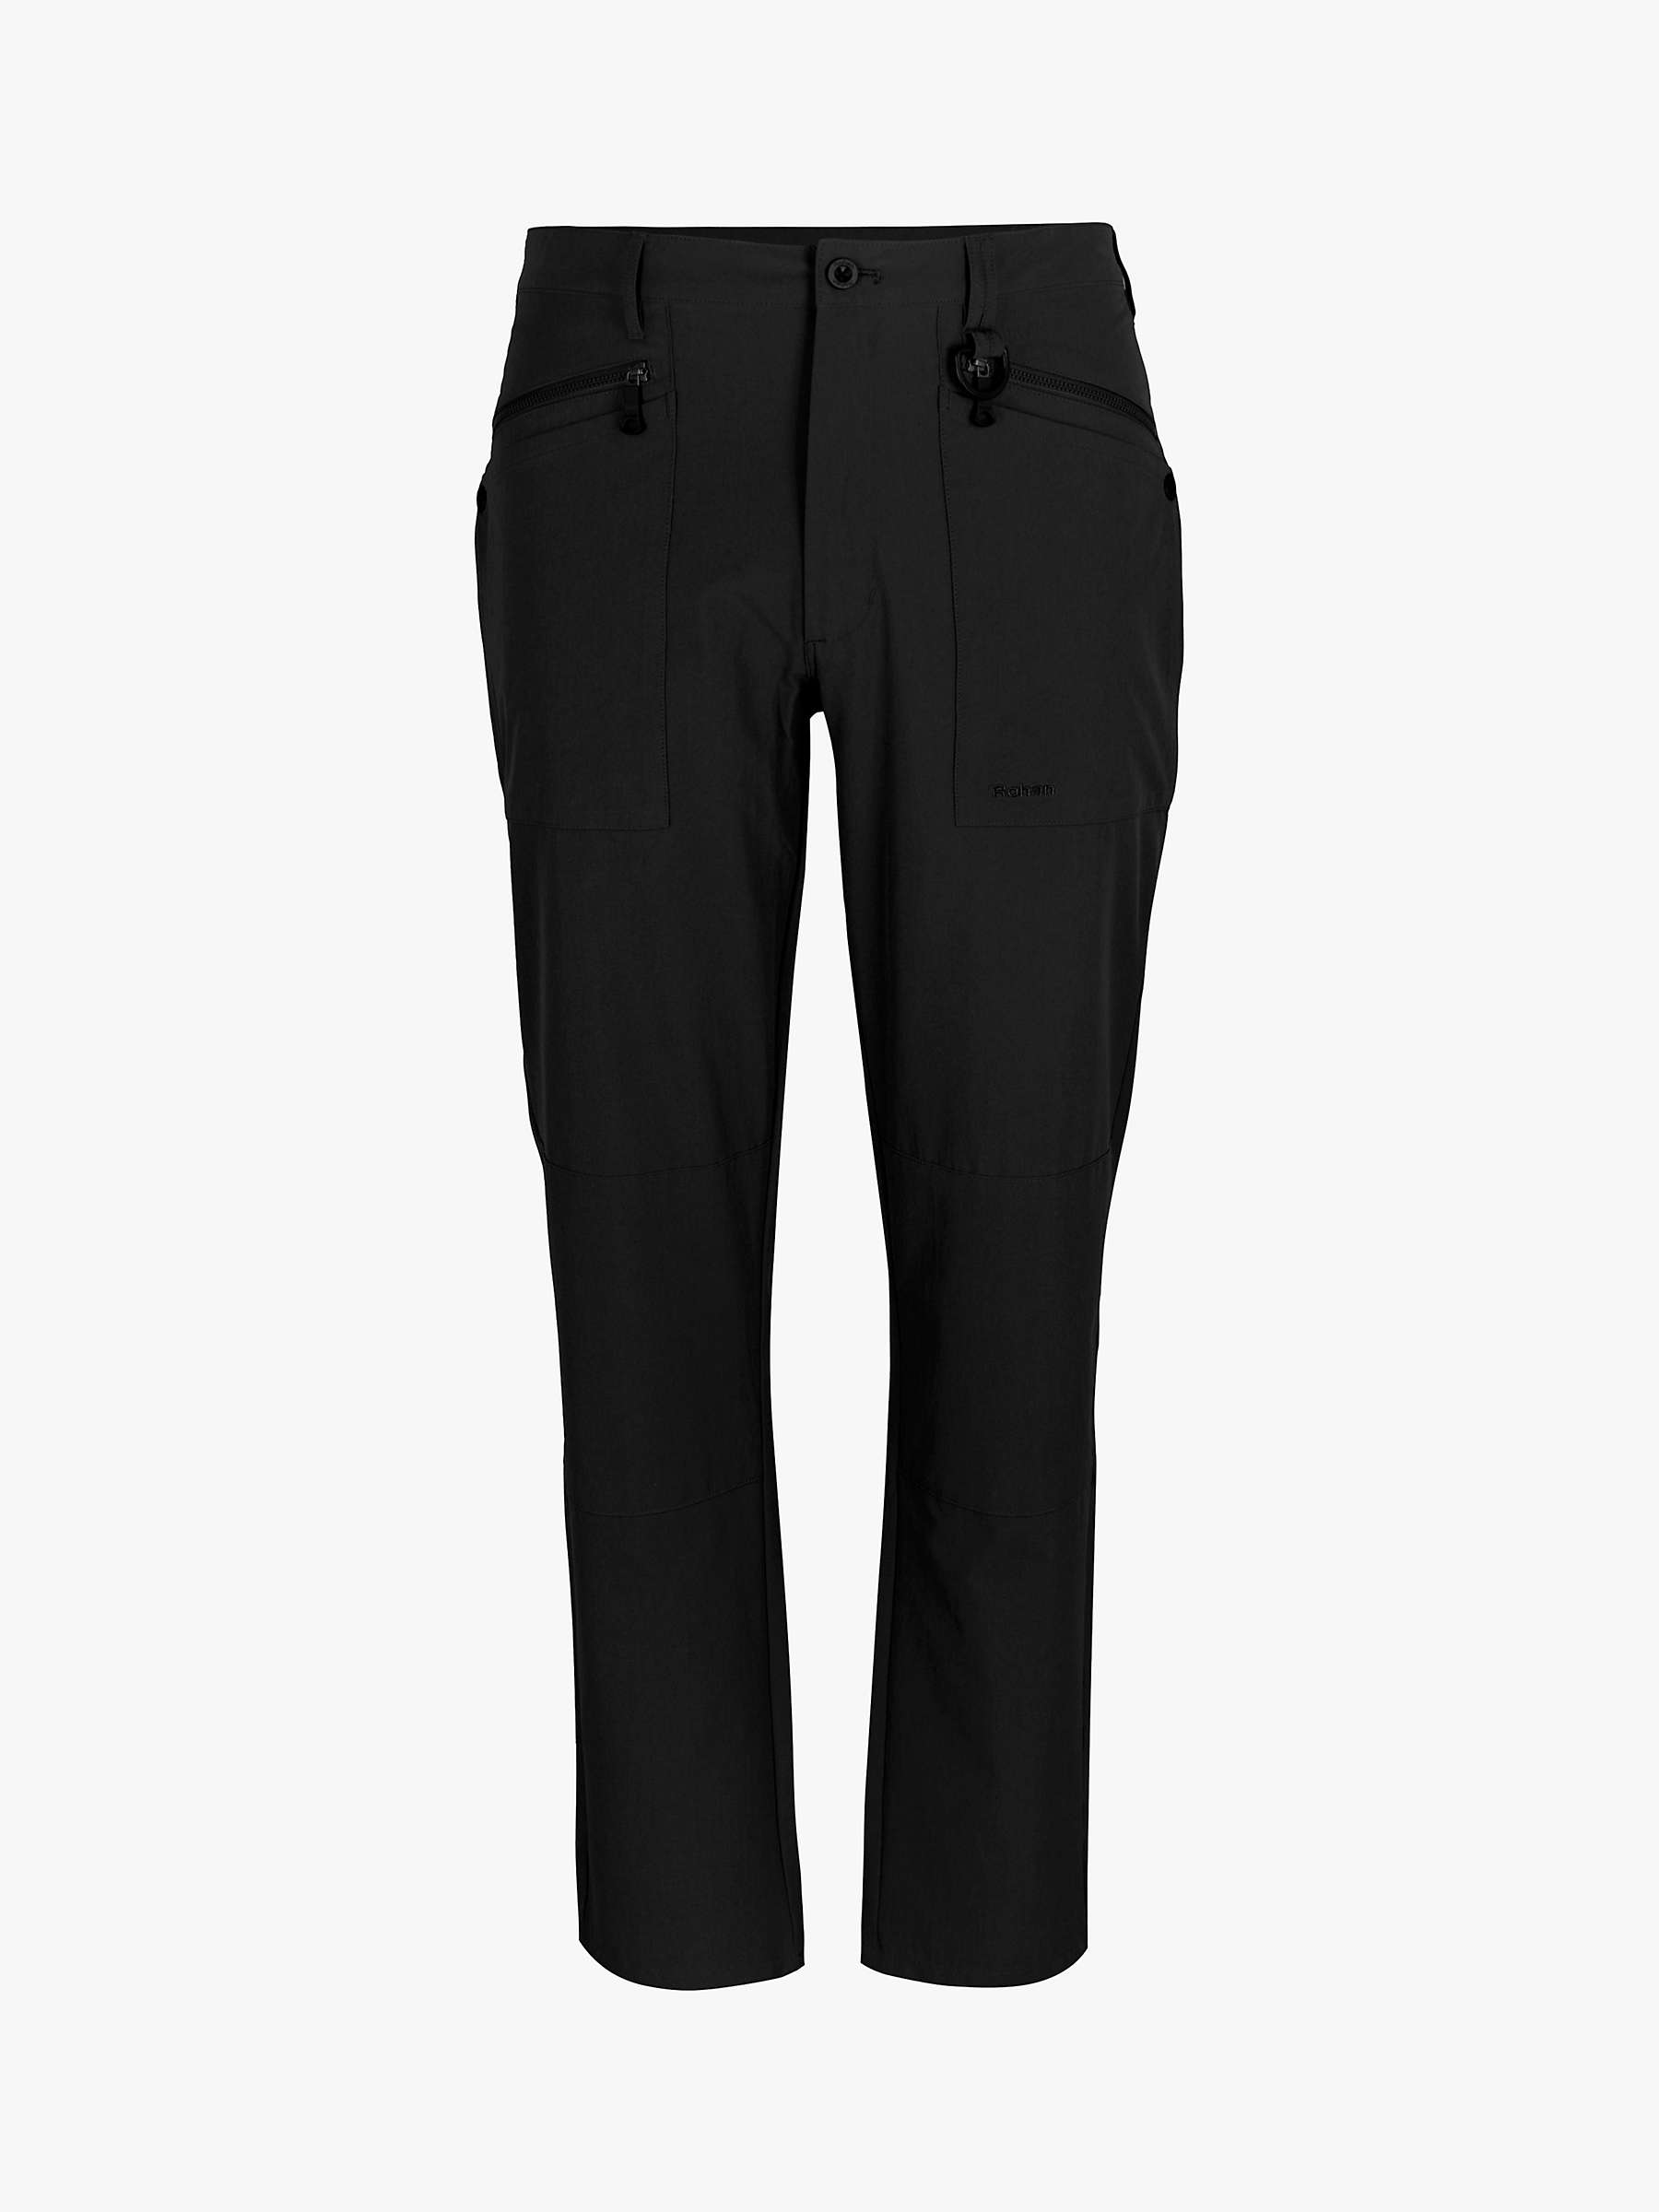 Buy Rohan Stretch Bags Walking Trousers Online at johnlewis.com